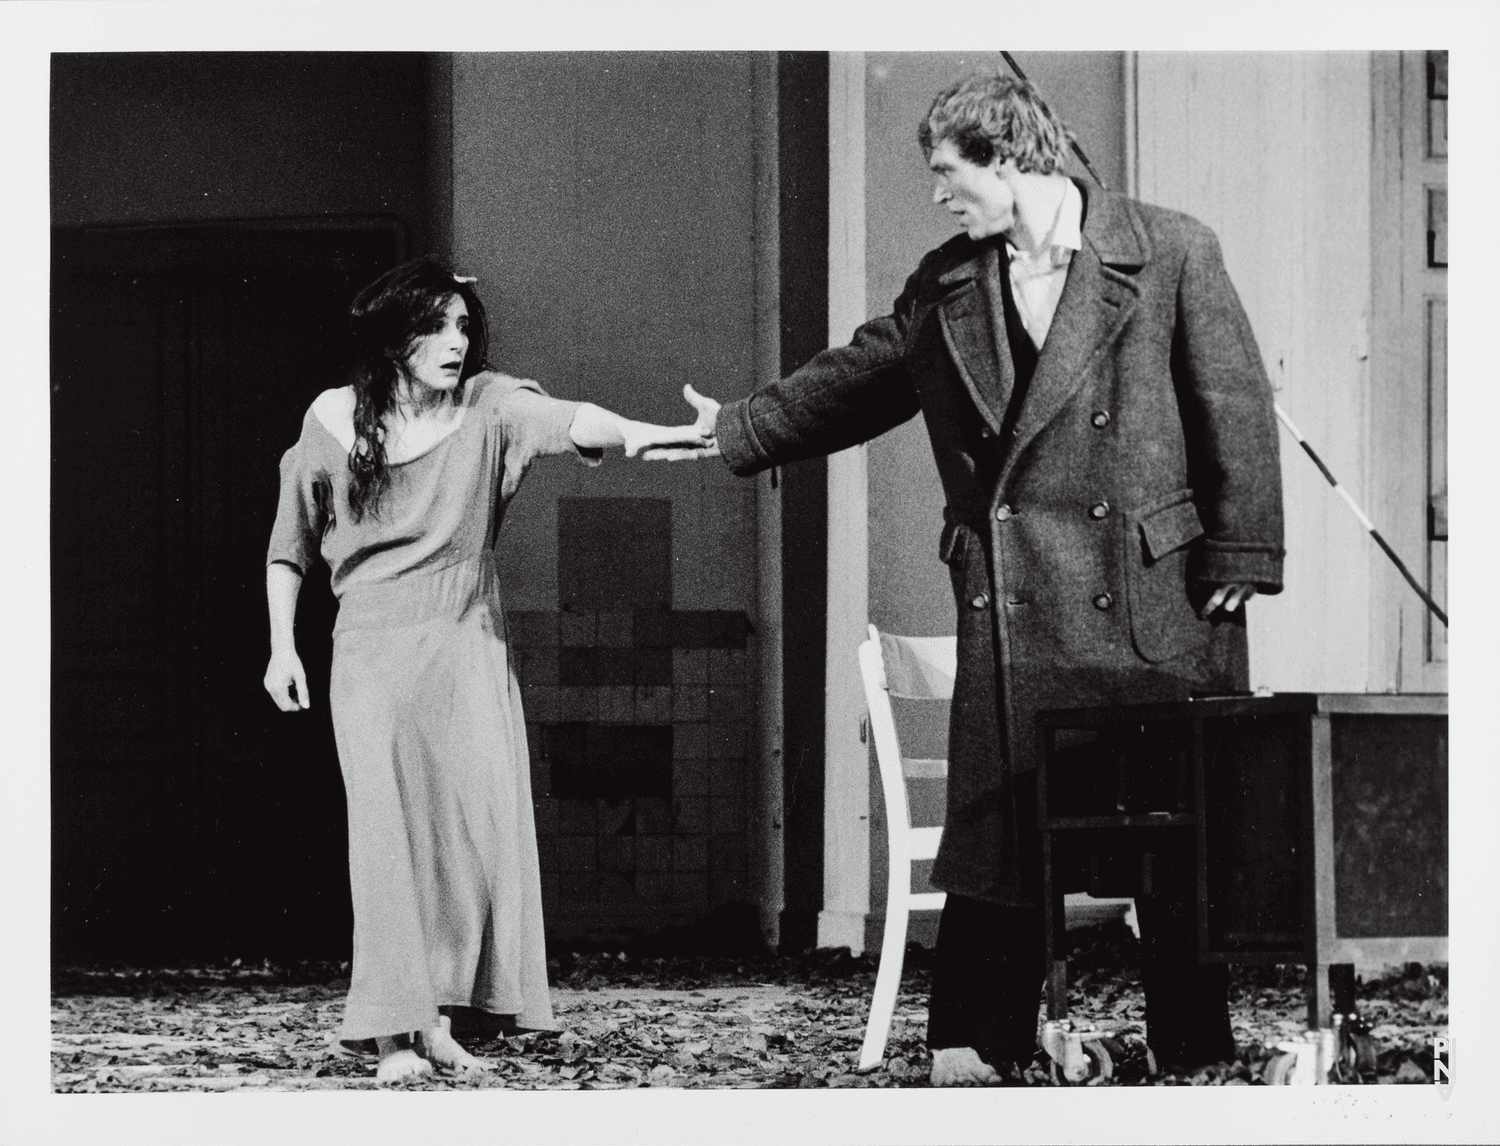 Hans Beenhakker and Beatrice Libonati in “Bluebeard. While Listening to a Tape Recording of Béla Bartók's Opera "Duke Bluebeard's Castle"” by Pina Bausch